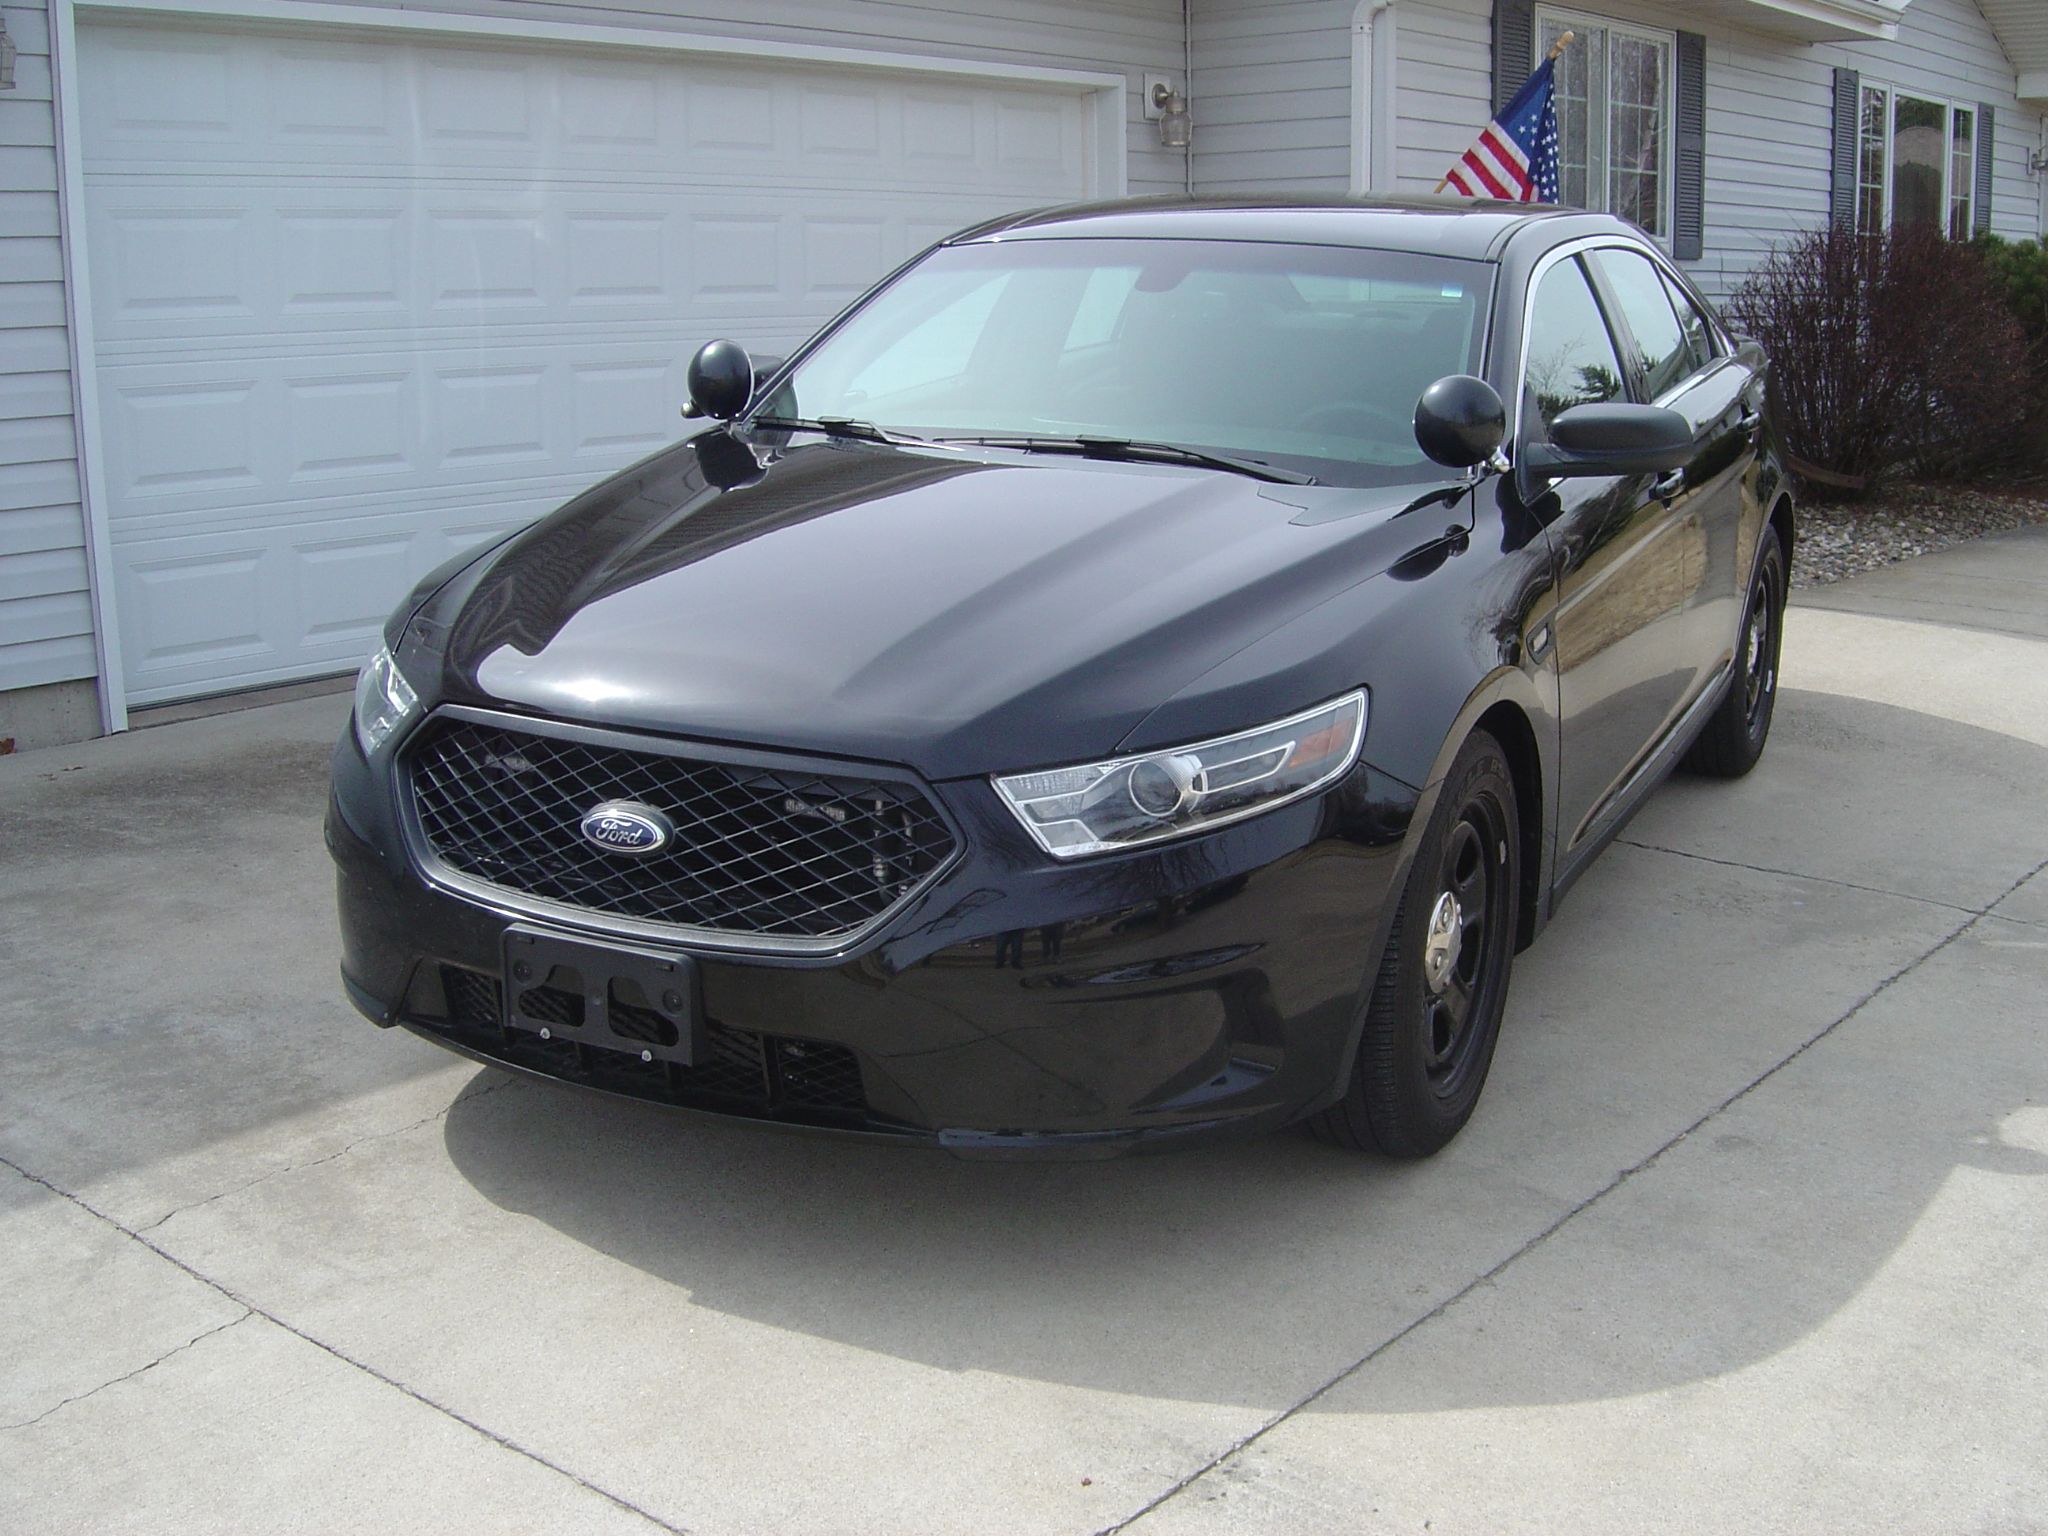  Ford Taurus Police Package